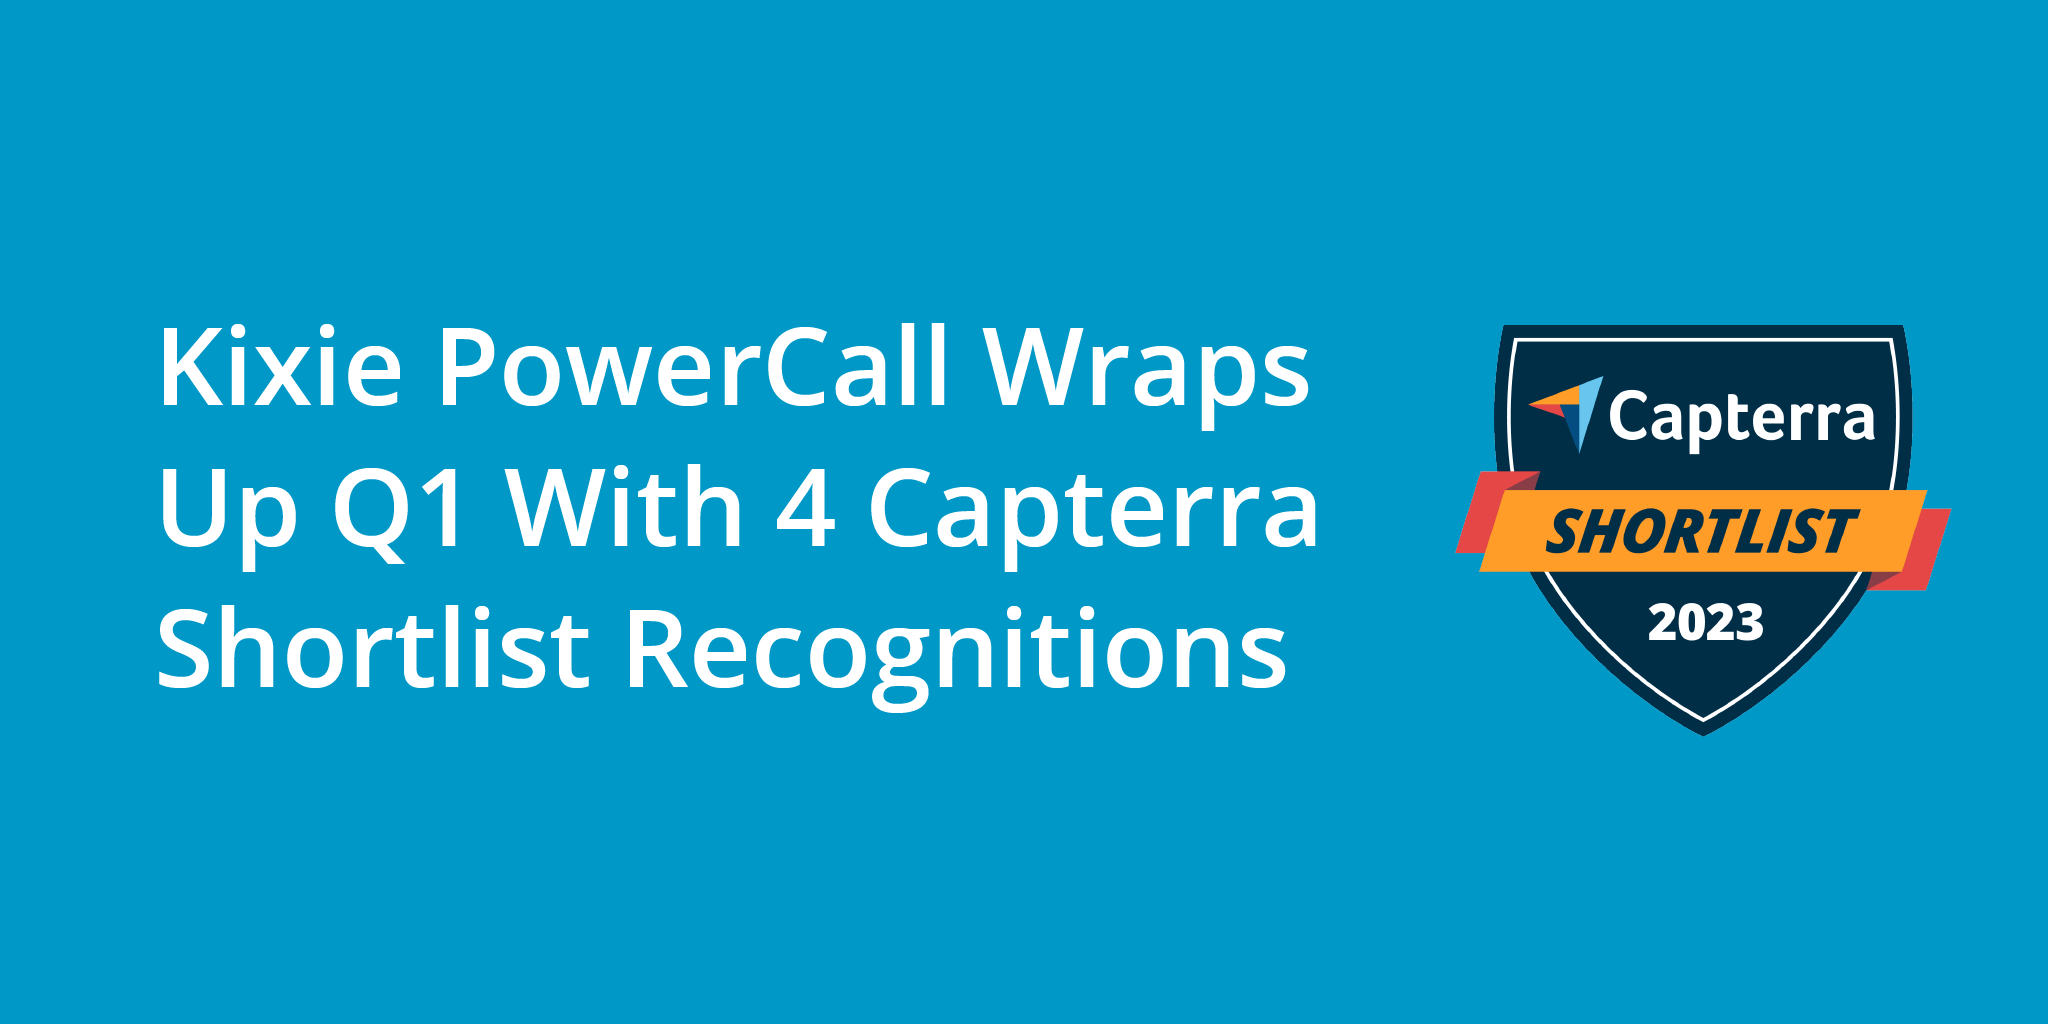 Kixie PowerCall Wraps Up Q1 With 4 Capterra Shortlist Recognitions | Telephones for business